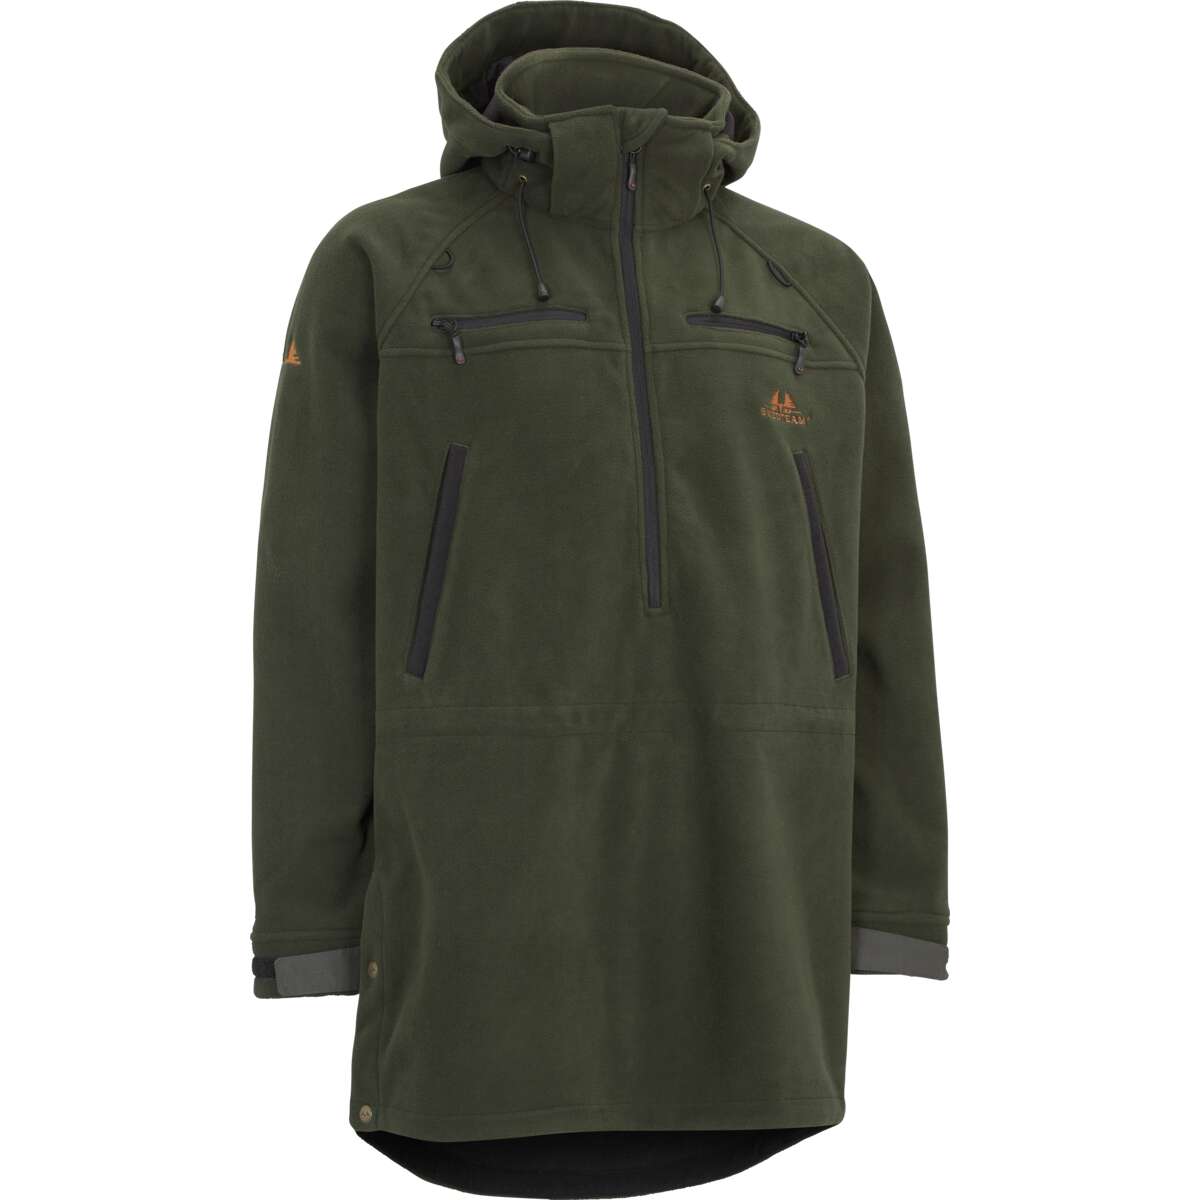 Alpha M Swedteam Anorak: Silent, warm and versatile for active hunting